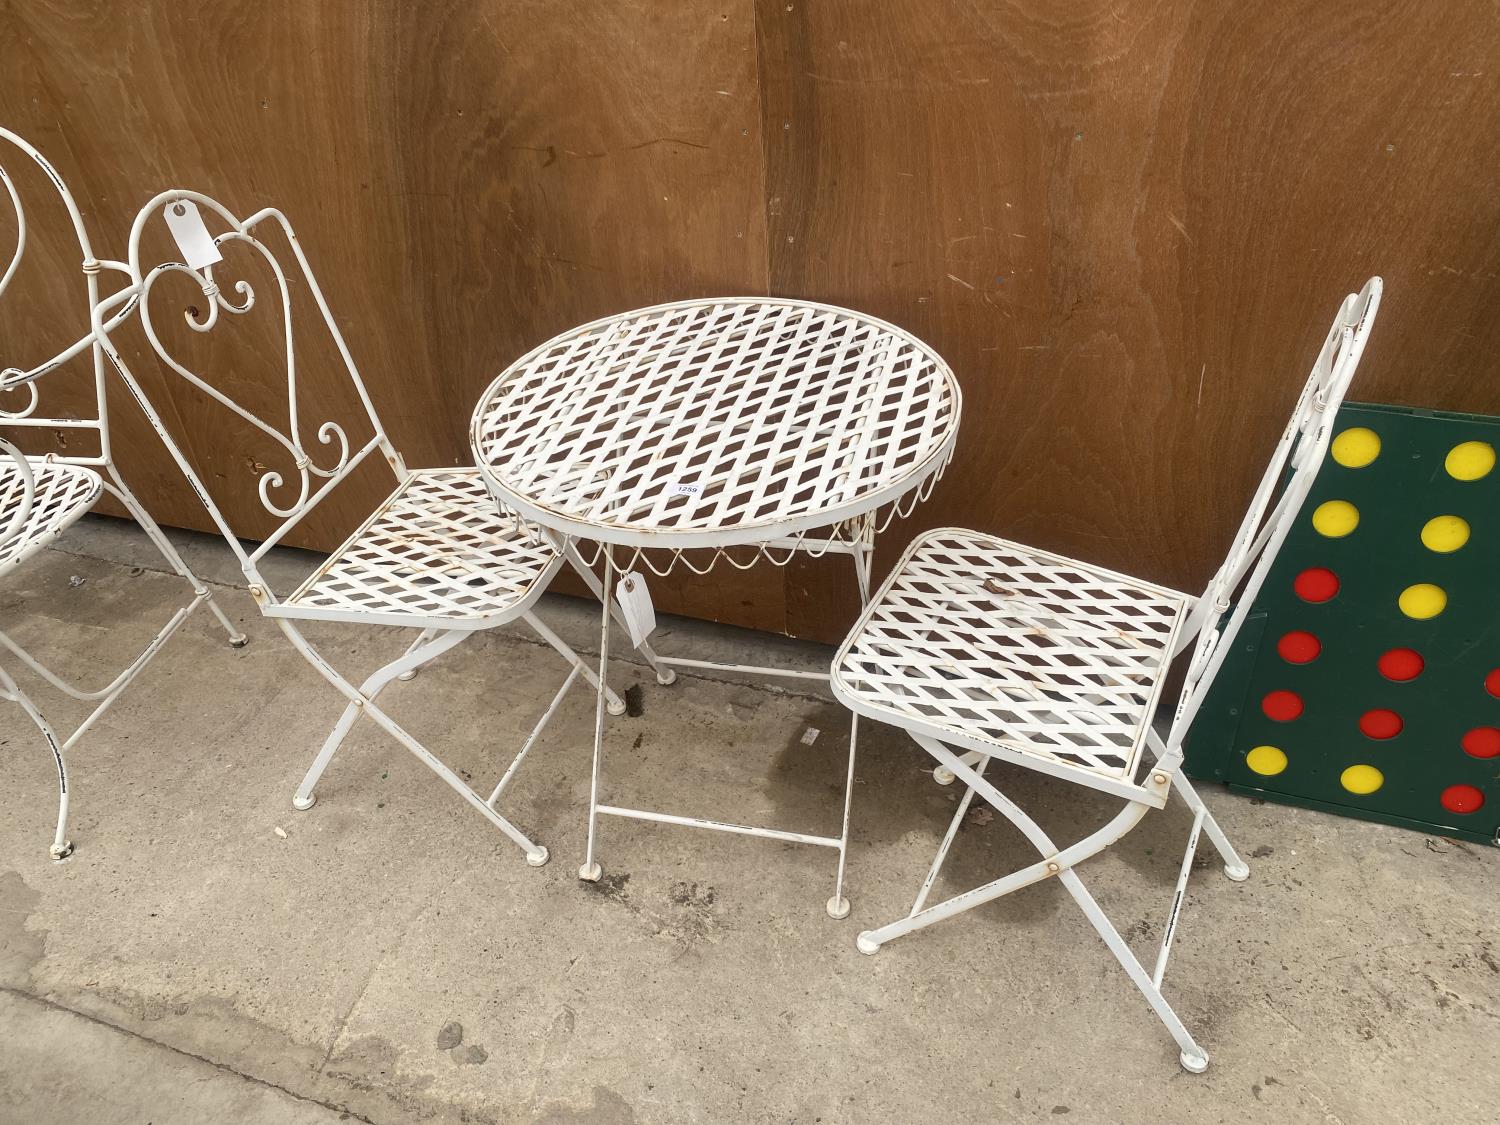 A DECORATIVE WROUGHT IRON BISTRO SET COMPRISING OF A ROUND TABLE AND TWO CHAIRS